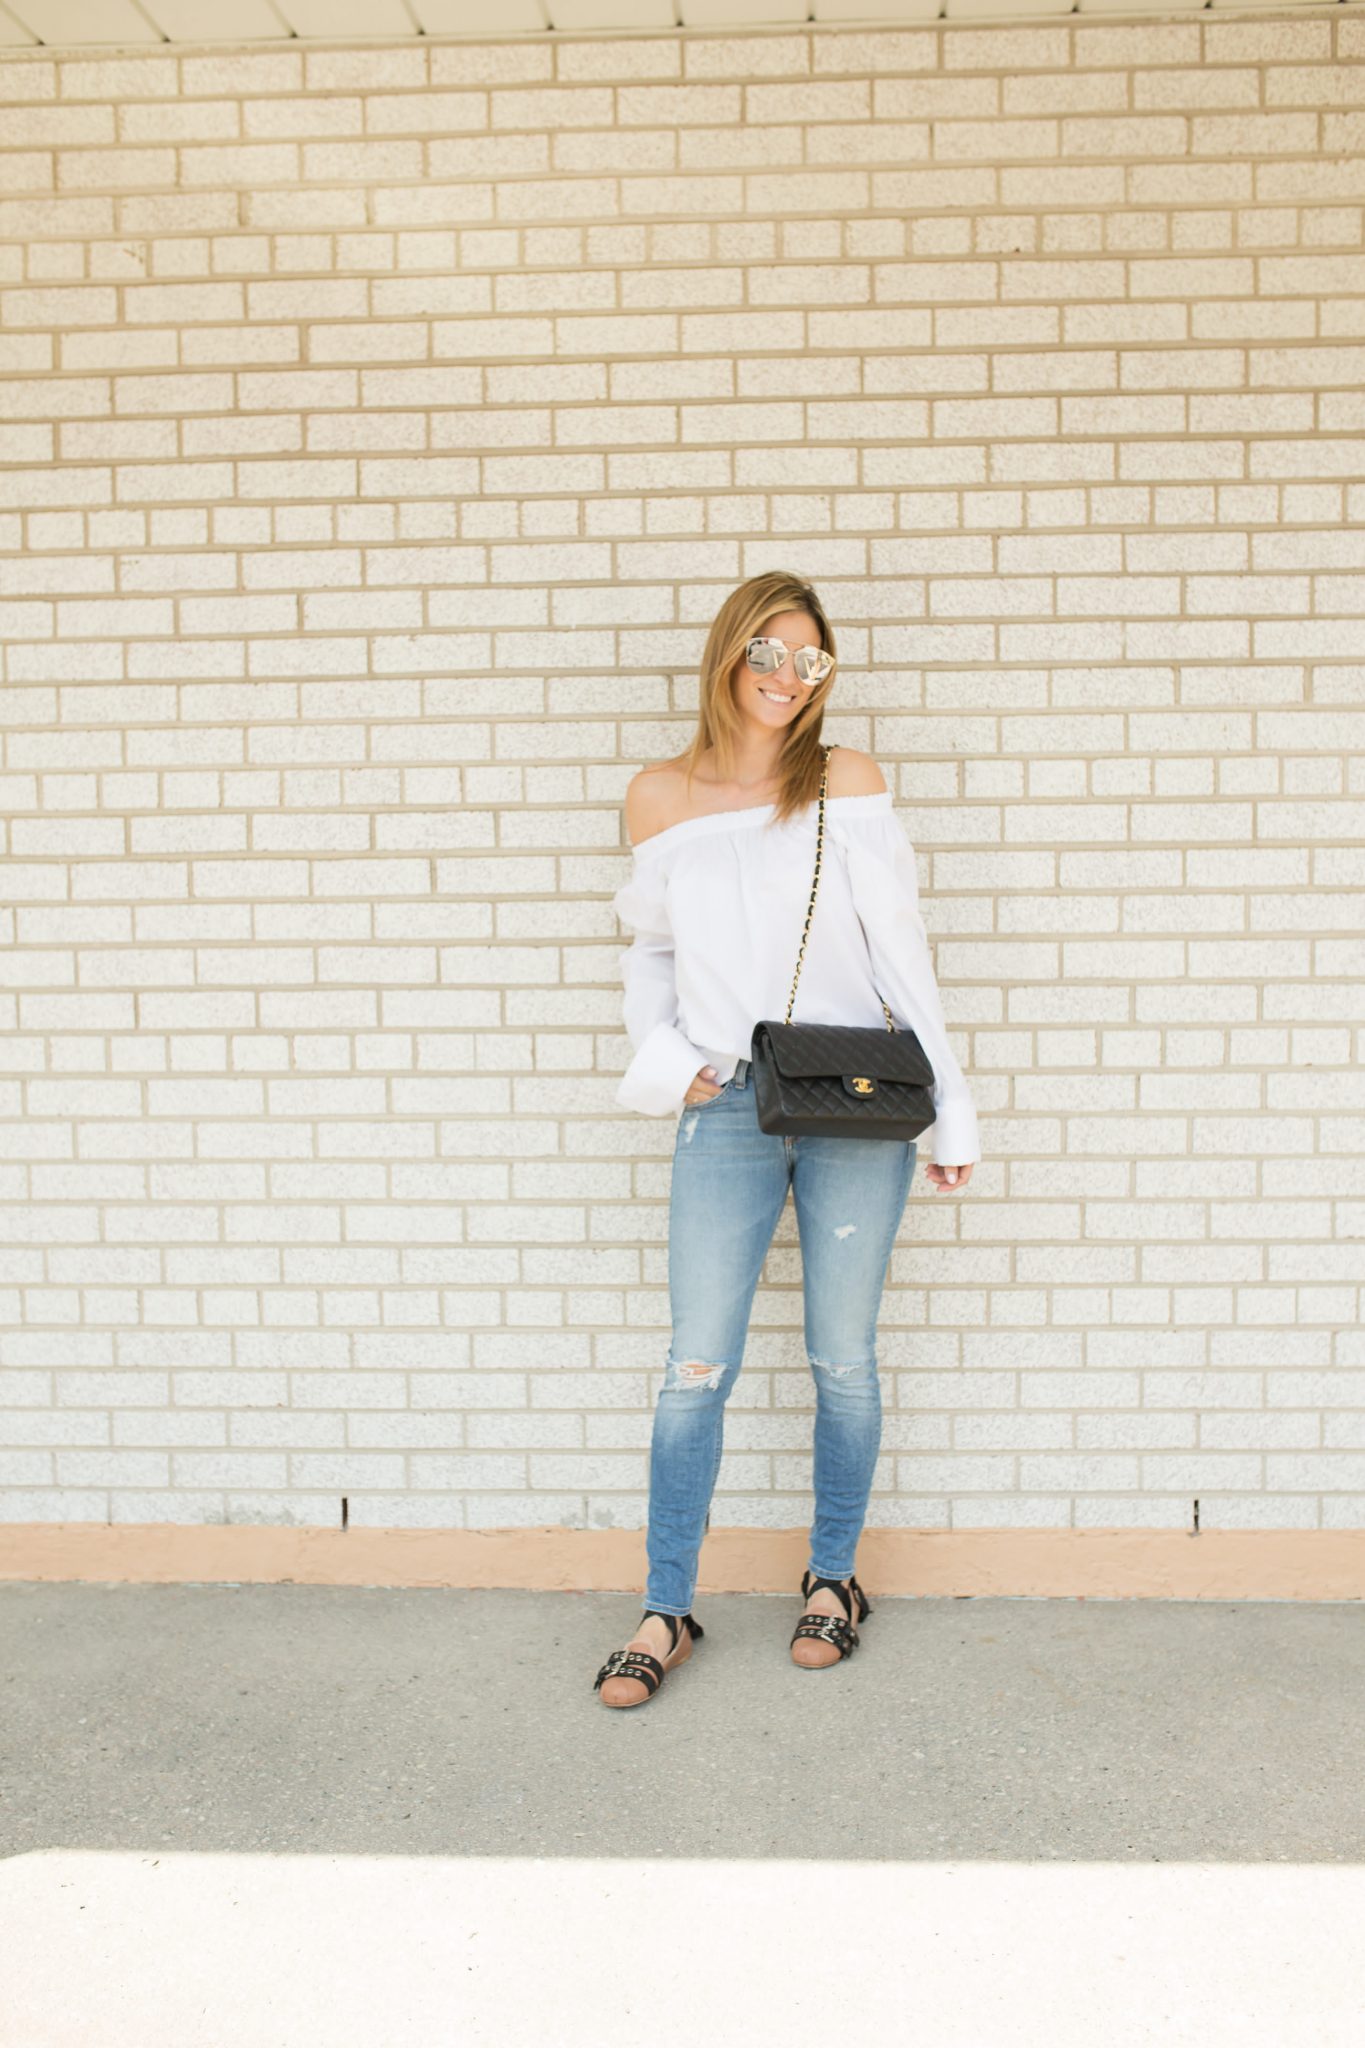 Sparkleshinylove #HumansofYV Yorkville Village off the shoulder white top, Rag & Bone Distressed Jeans from TNT, Miu Miu double buckle nude loafers